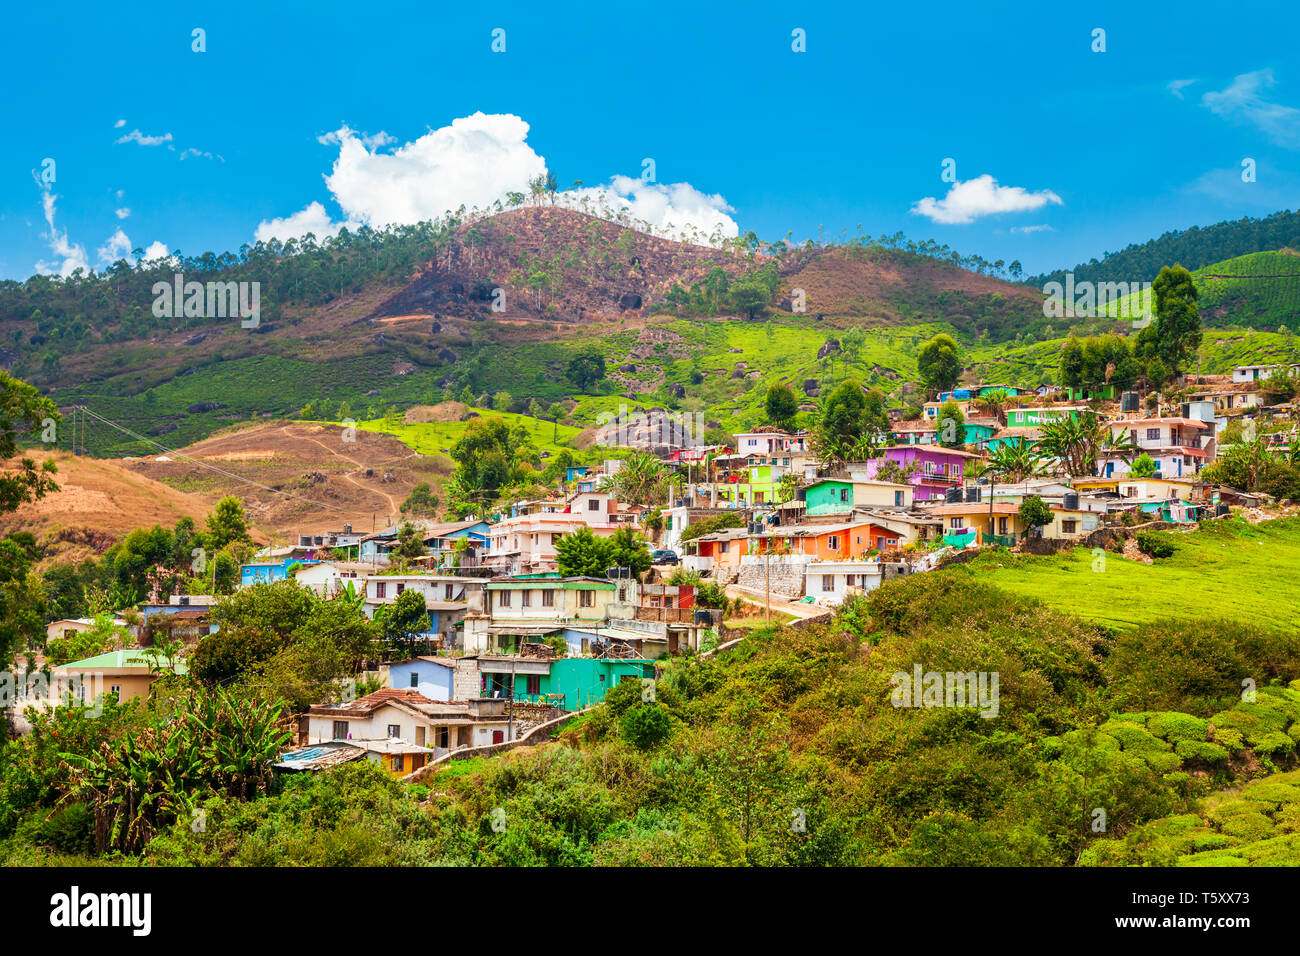 Landscape of Munnar town, surrounded with tea plantation in India Stock Photo